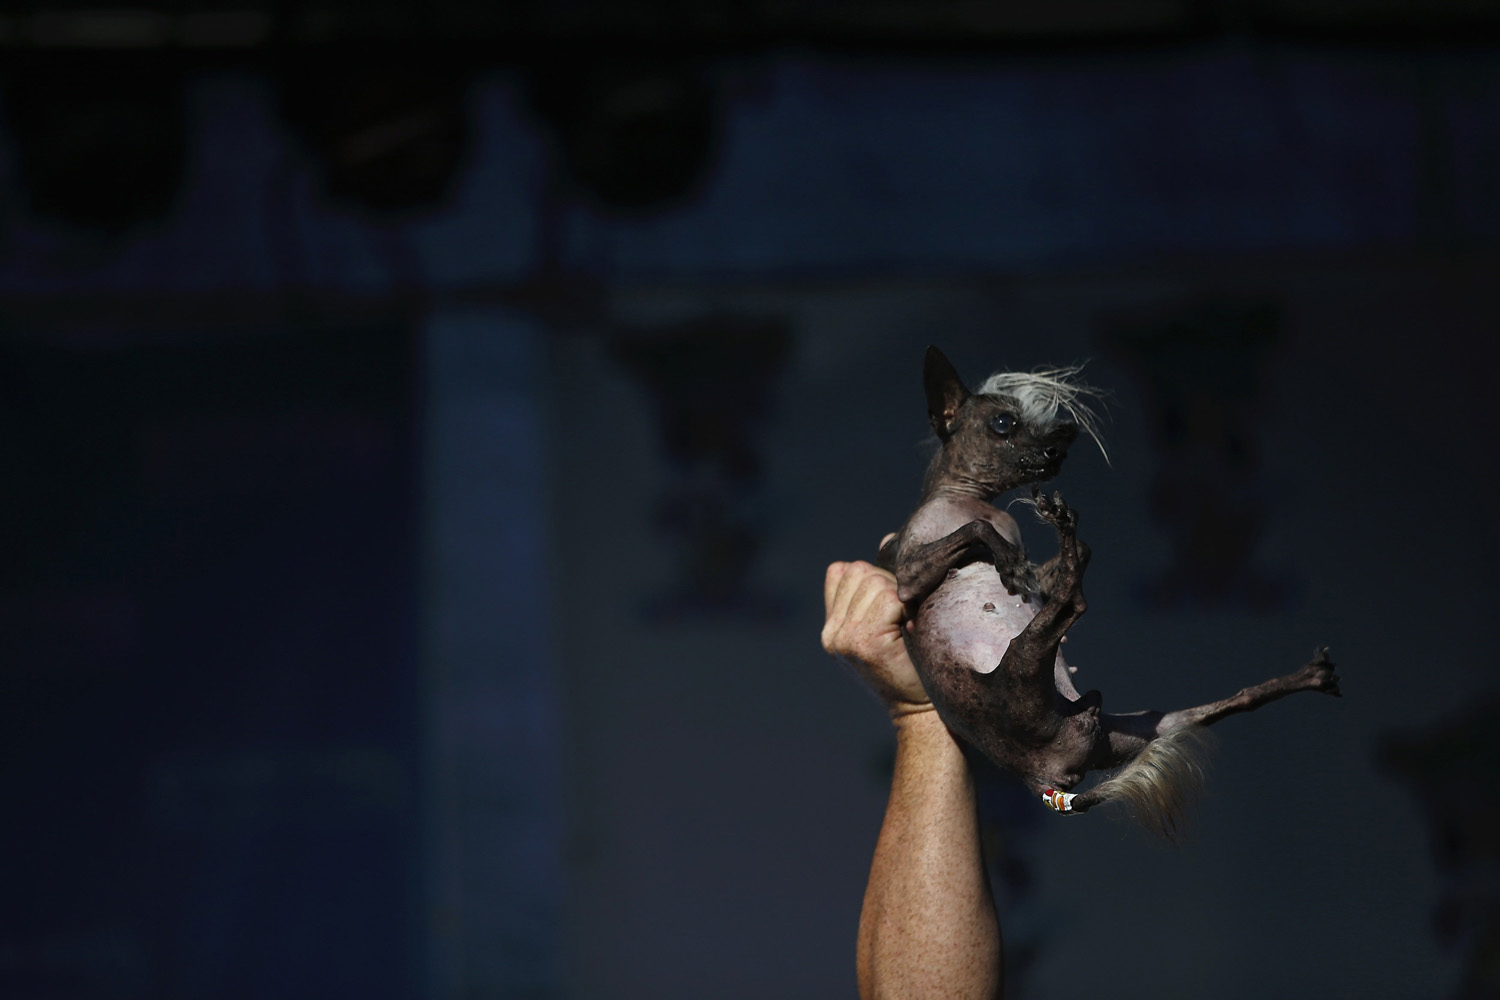 SweePee Rambo, a two-year-old Chihuahua Chinese Crested mix, is raised in the air during the 2014 World's Ugliest Dog contest in Petaluma, California on June 20, 2014.